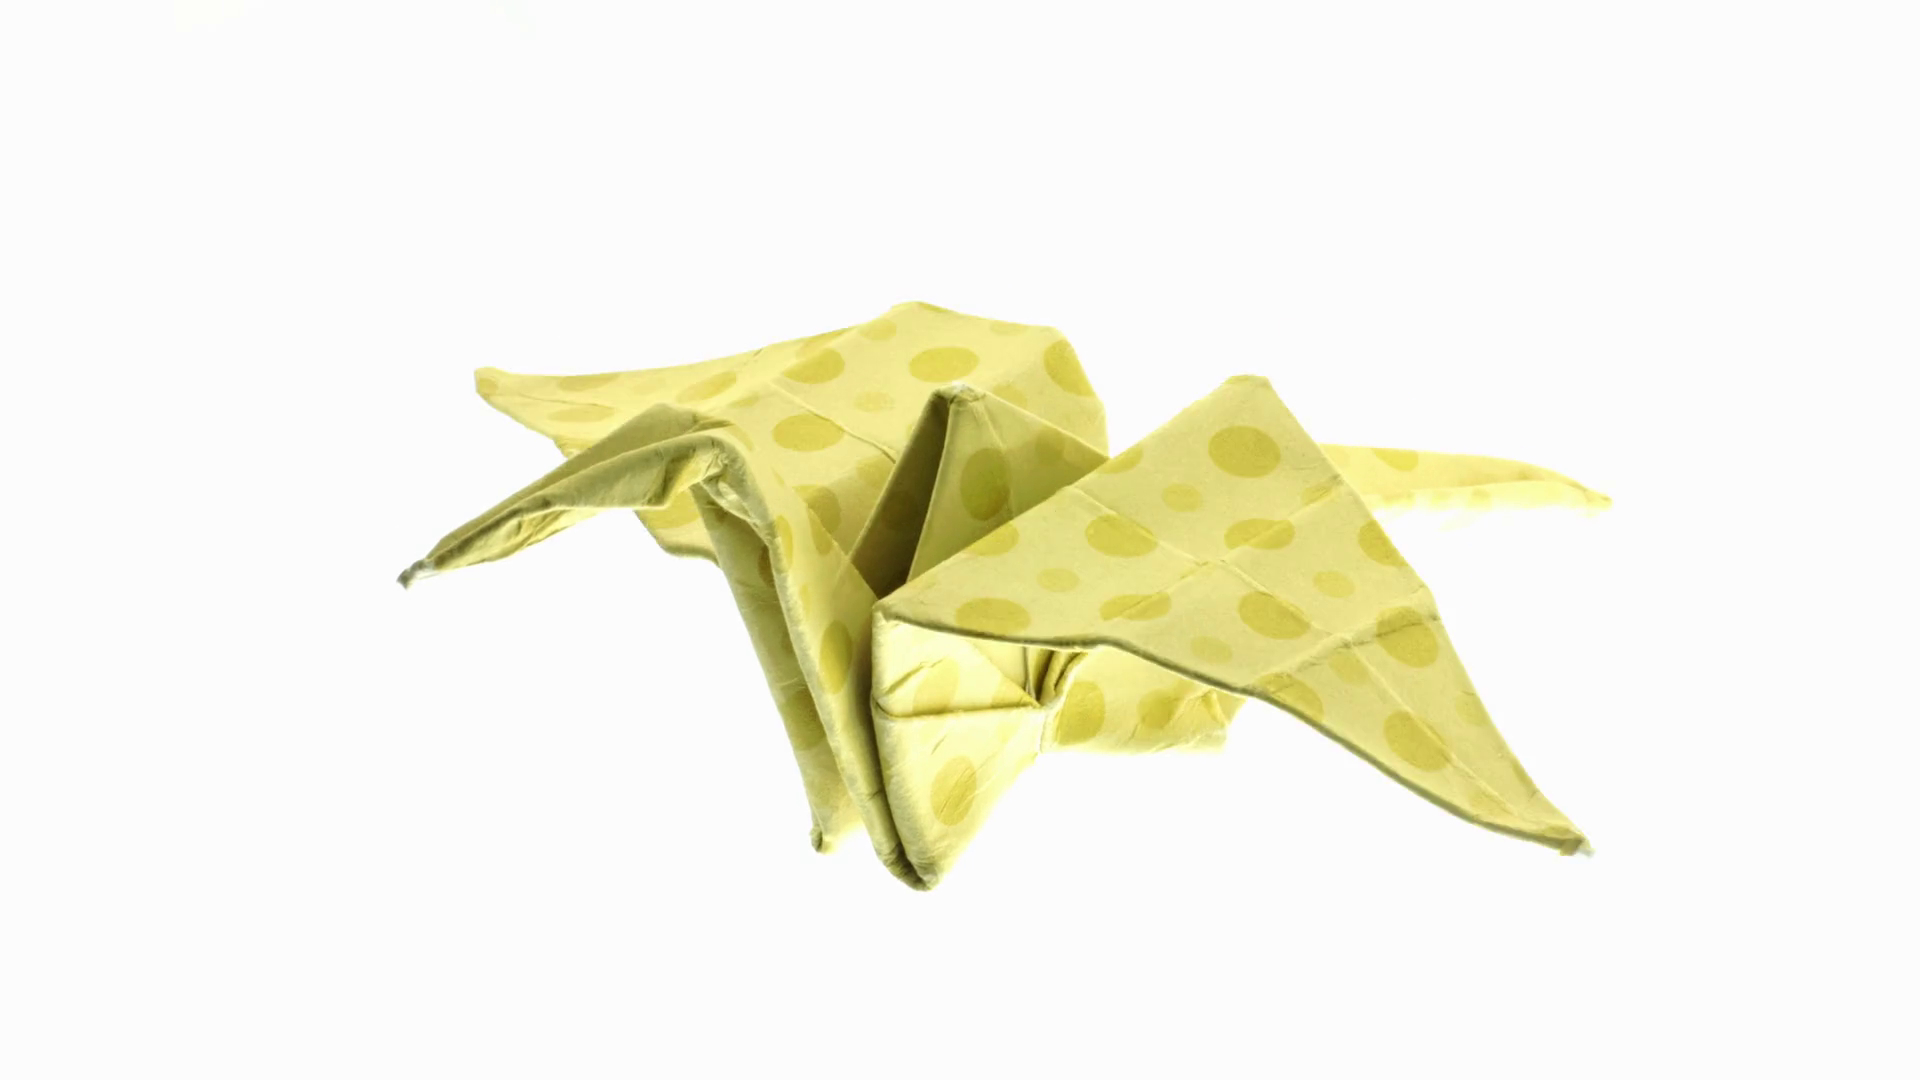 Crane Origami Video Animated Origami Crane Flying On White Background In Different Colours